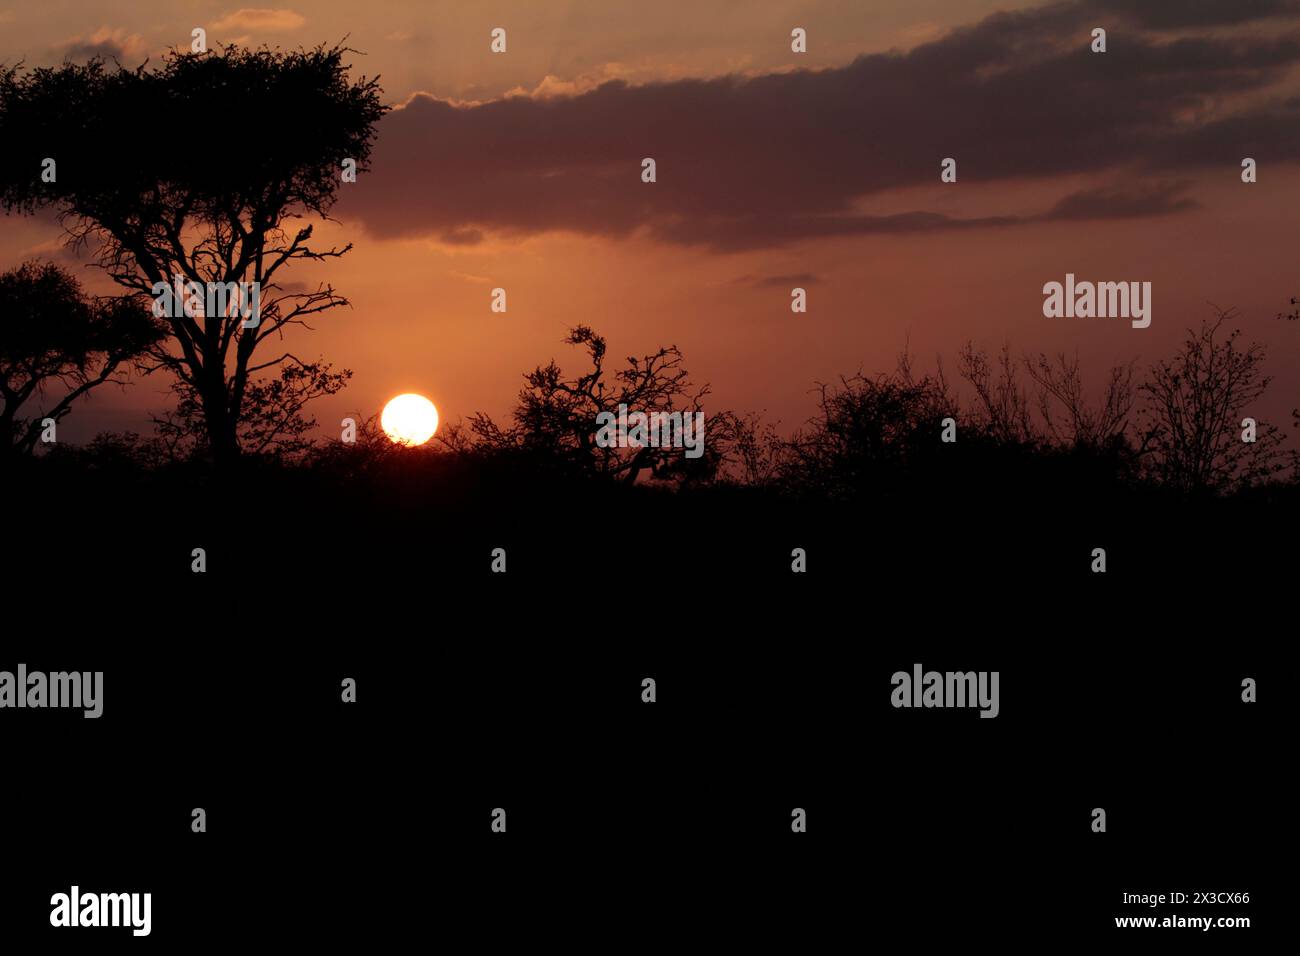 Southern African scenery and landscapes. Sunset Stock Photo